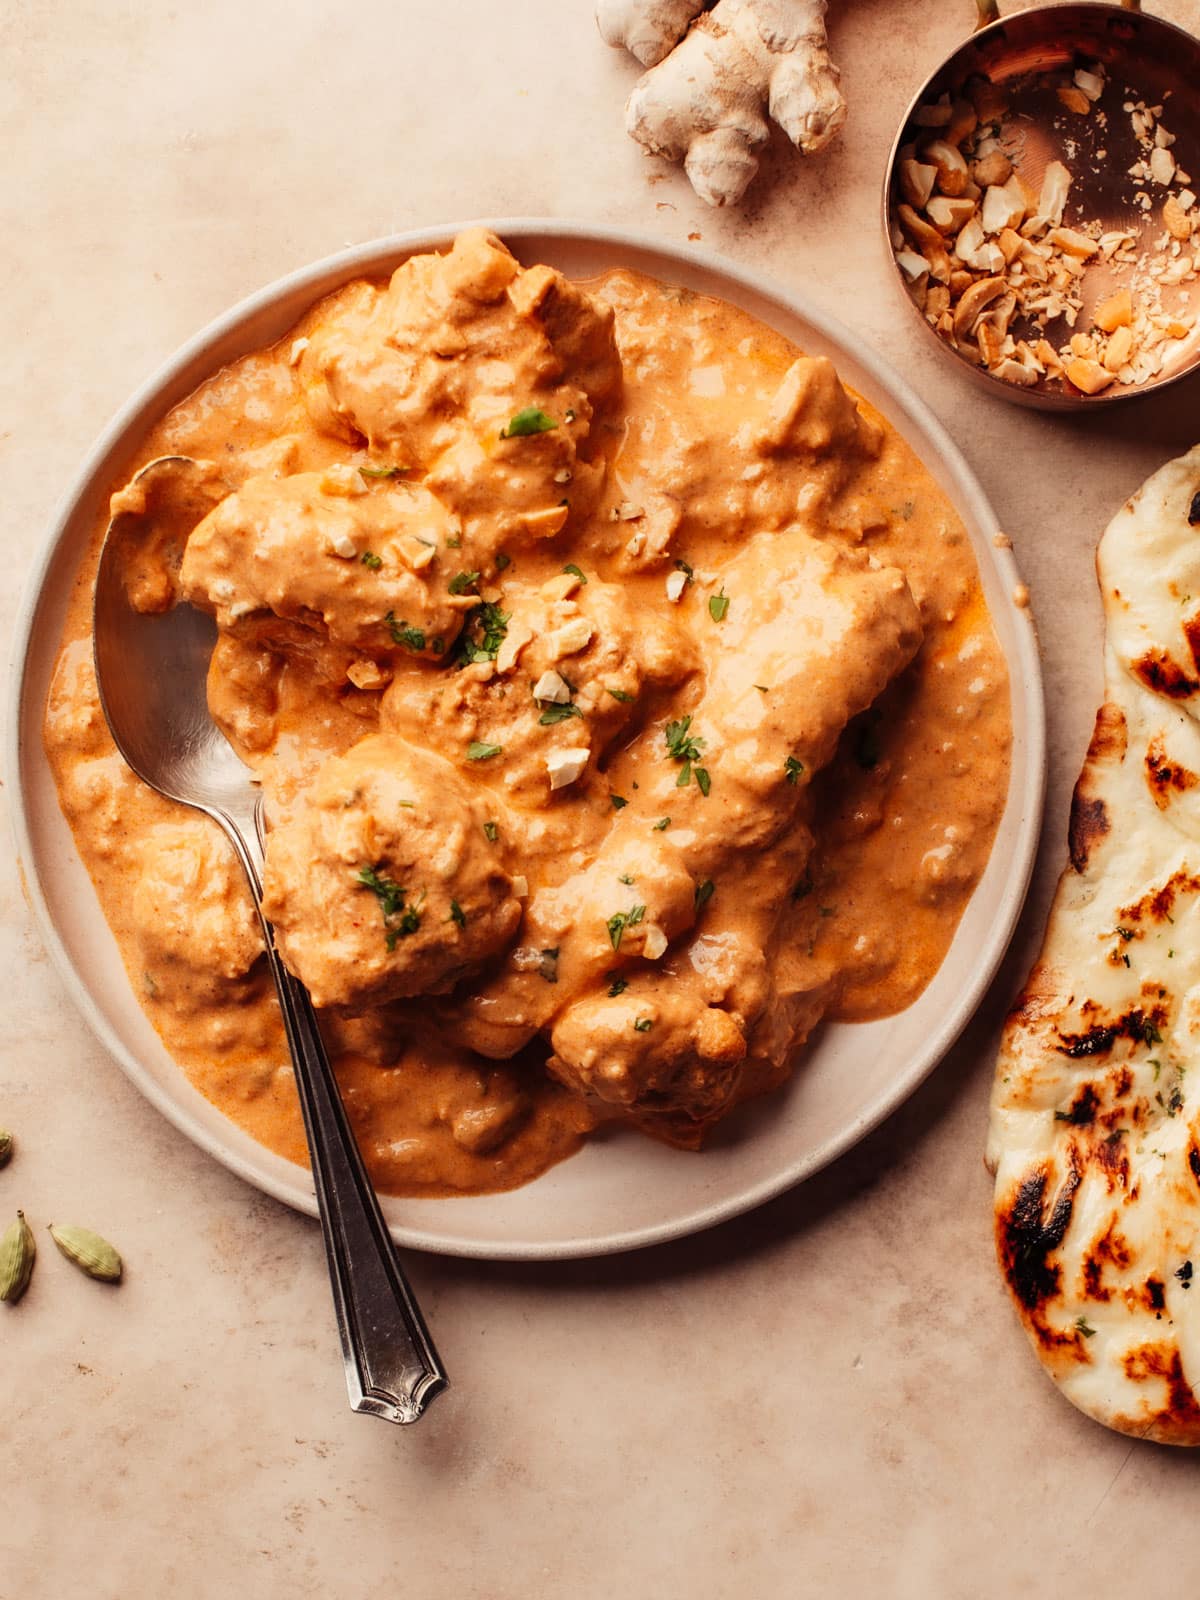 An aromatic and creamy chicken korma dish is beautifully presented in a large plate, garnished with fresh cilantro and nuts. A freshly baked homemade butter naan rests beside it, ready to be torn and dipped into the flavorful curry.